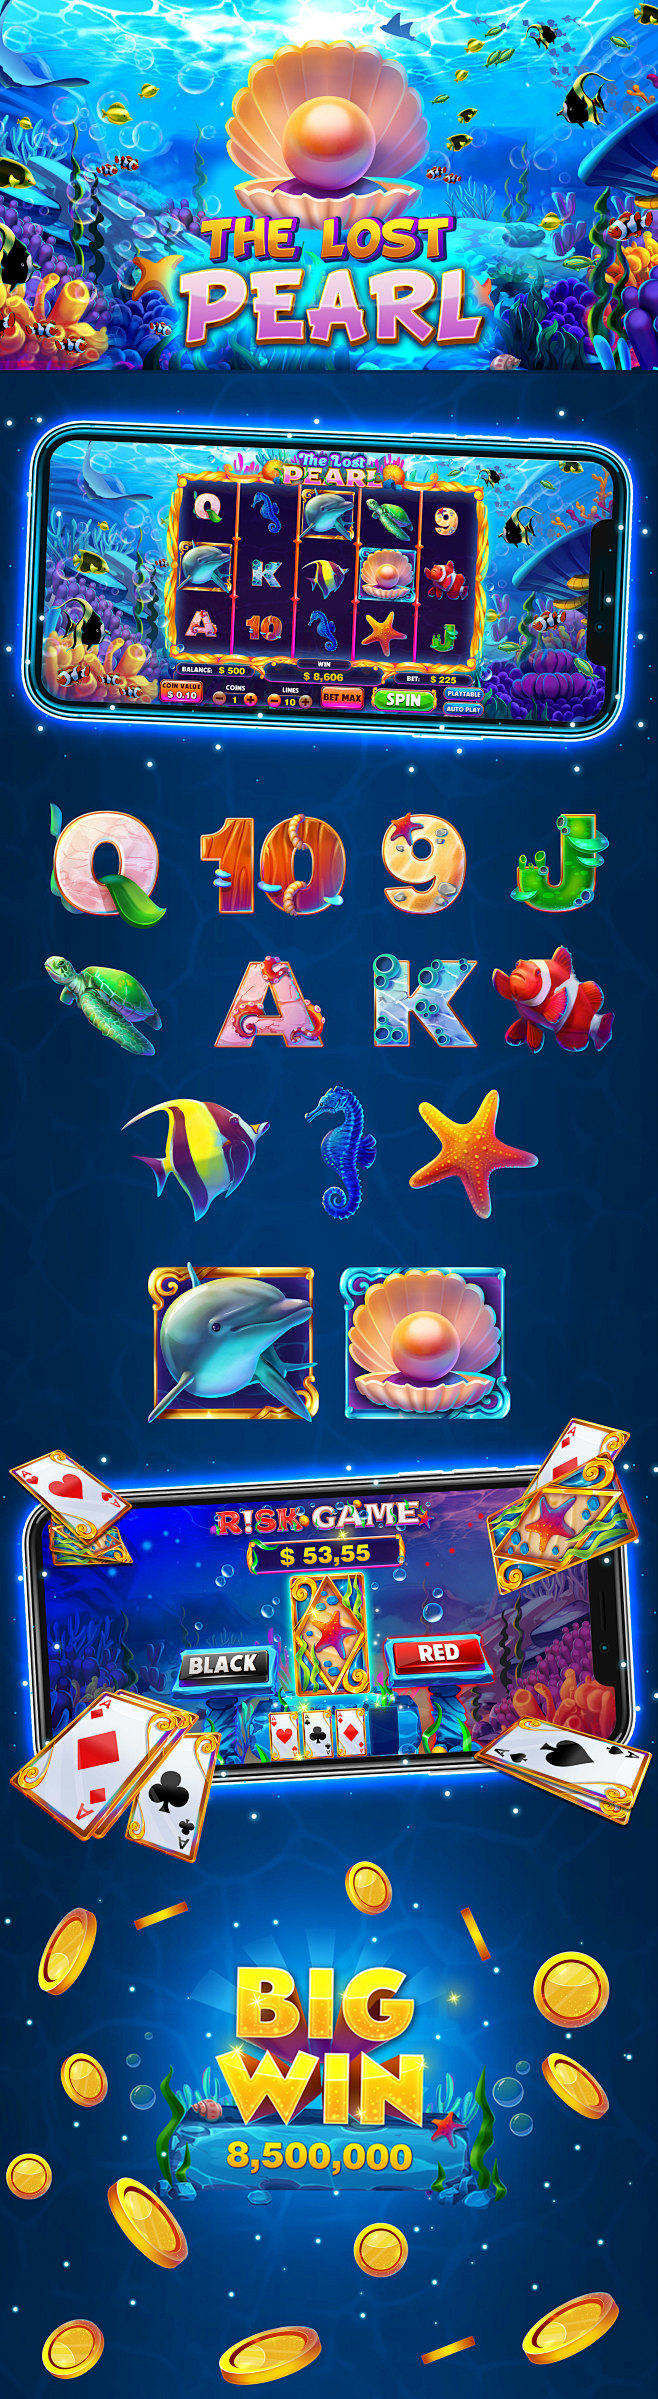 The lost pearl slot ...